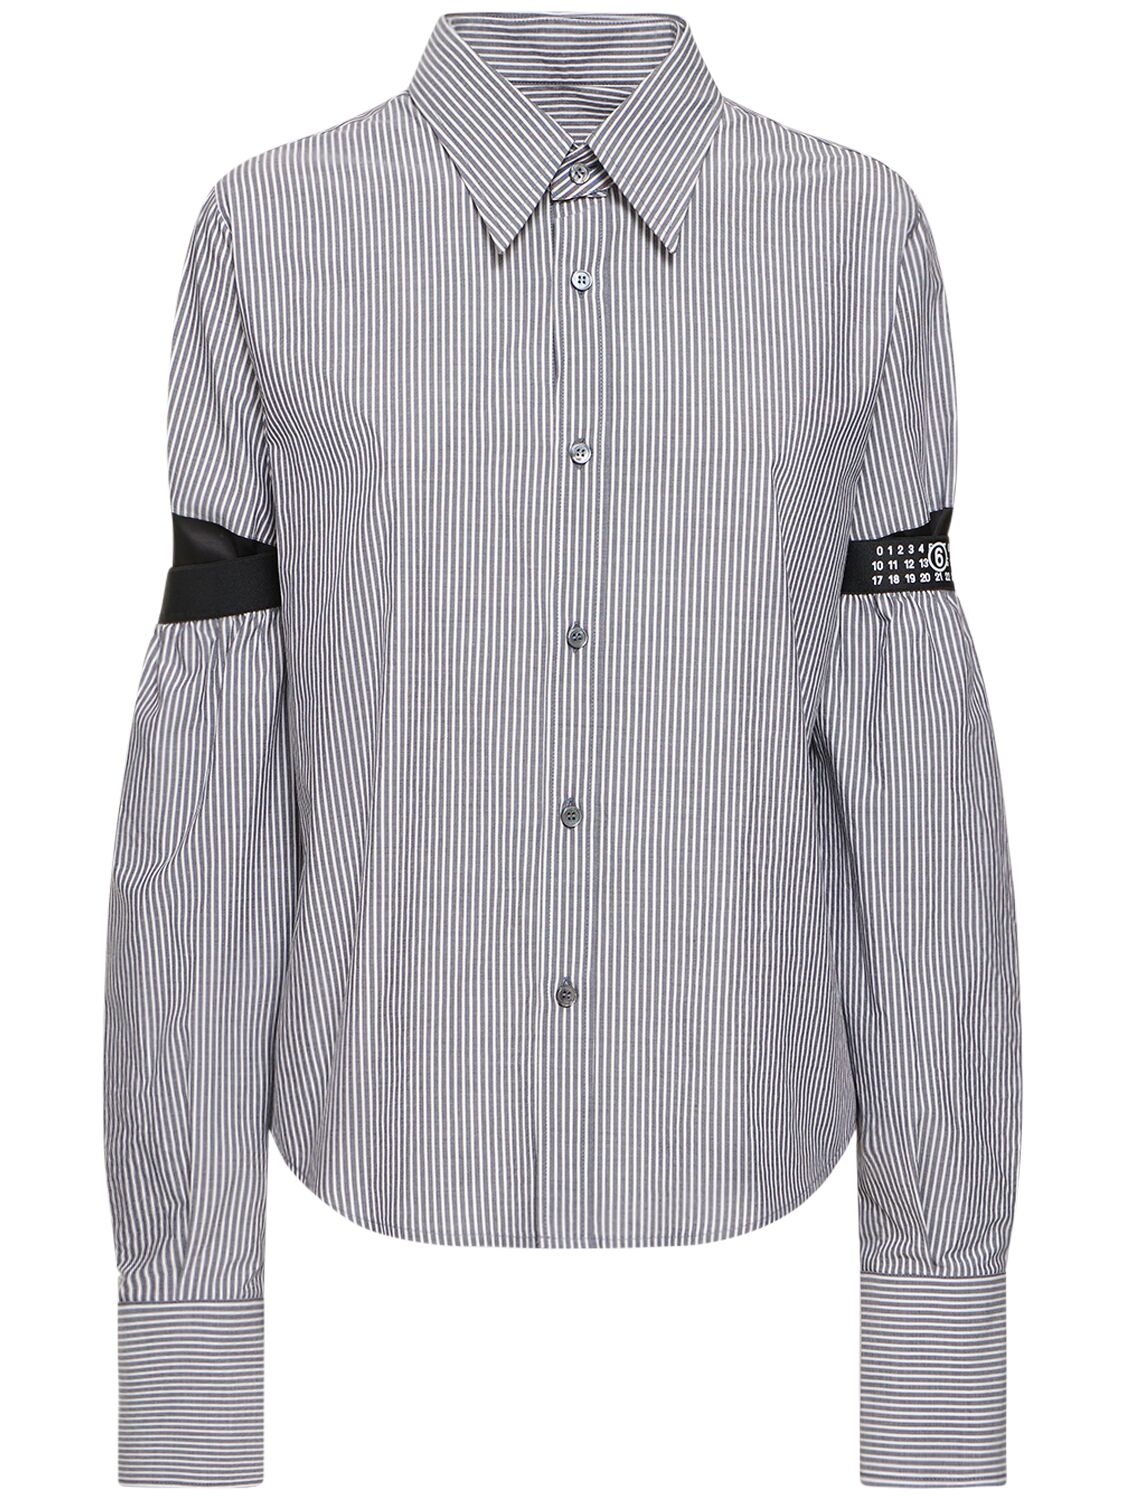 Image of Cotton Long-sleeved Shirt